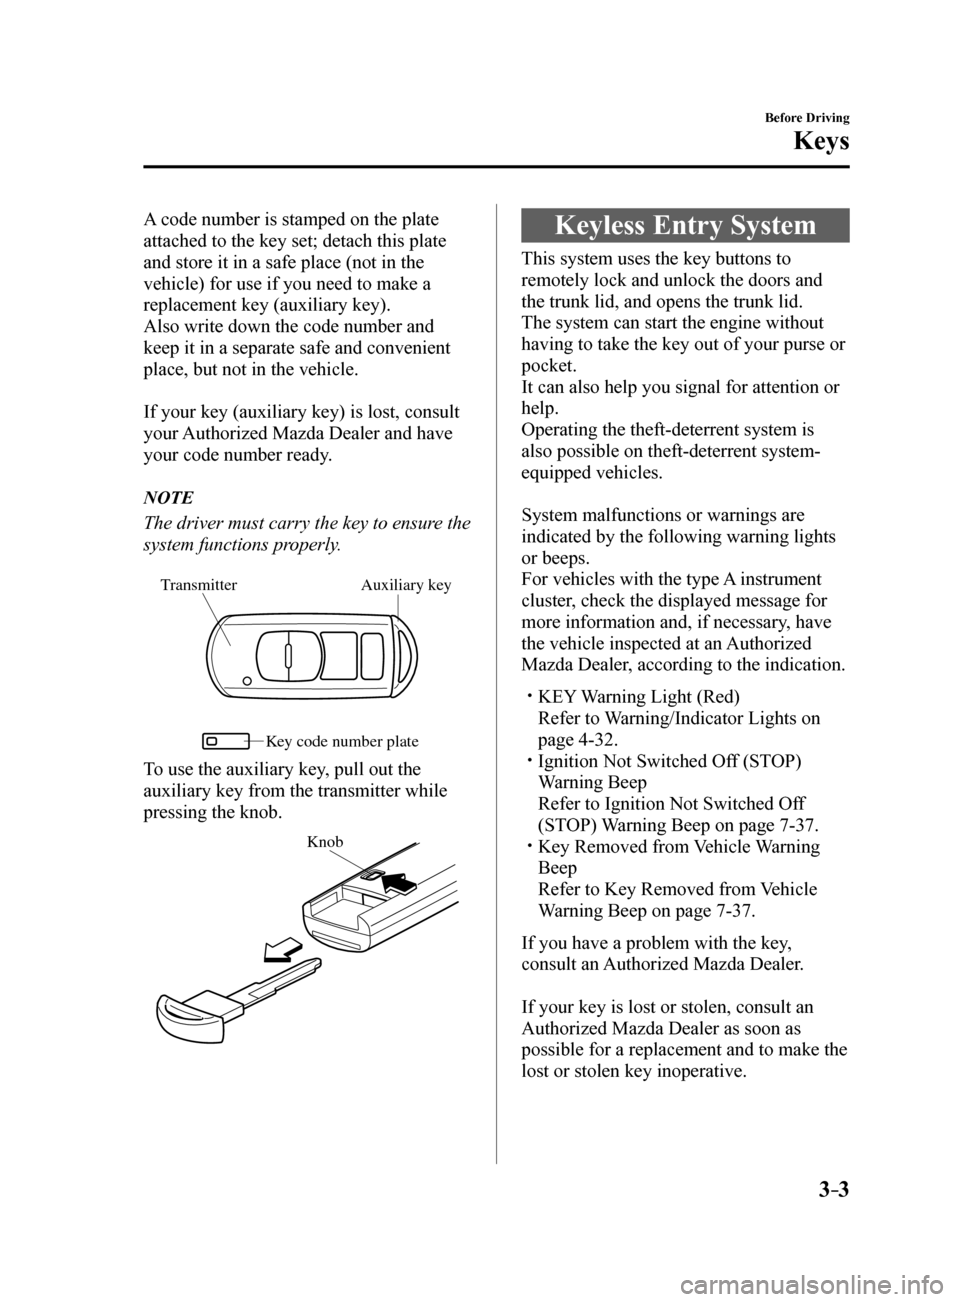 MAZDA MODEL 6 2017   (in English) Manual PDF 3–3
Before Driving
Keys
A code number is stamped on the plate 
attached to the key set; detach this plate 
and store it in a safe place (not in the 
vehicle) for use if you need to make a 
replaceme